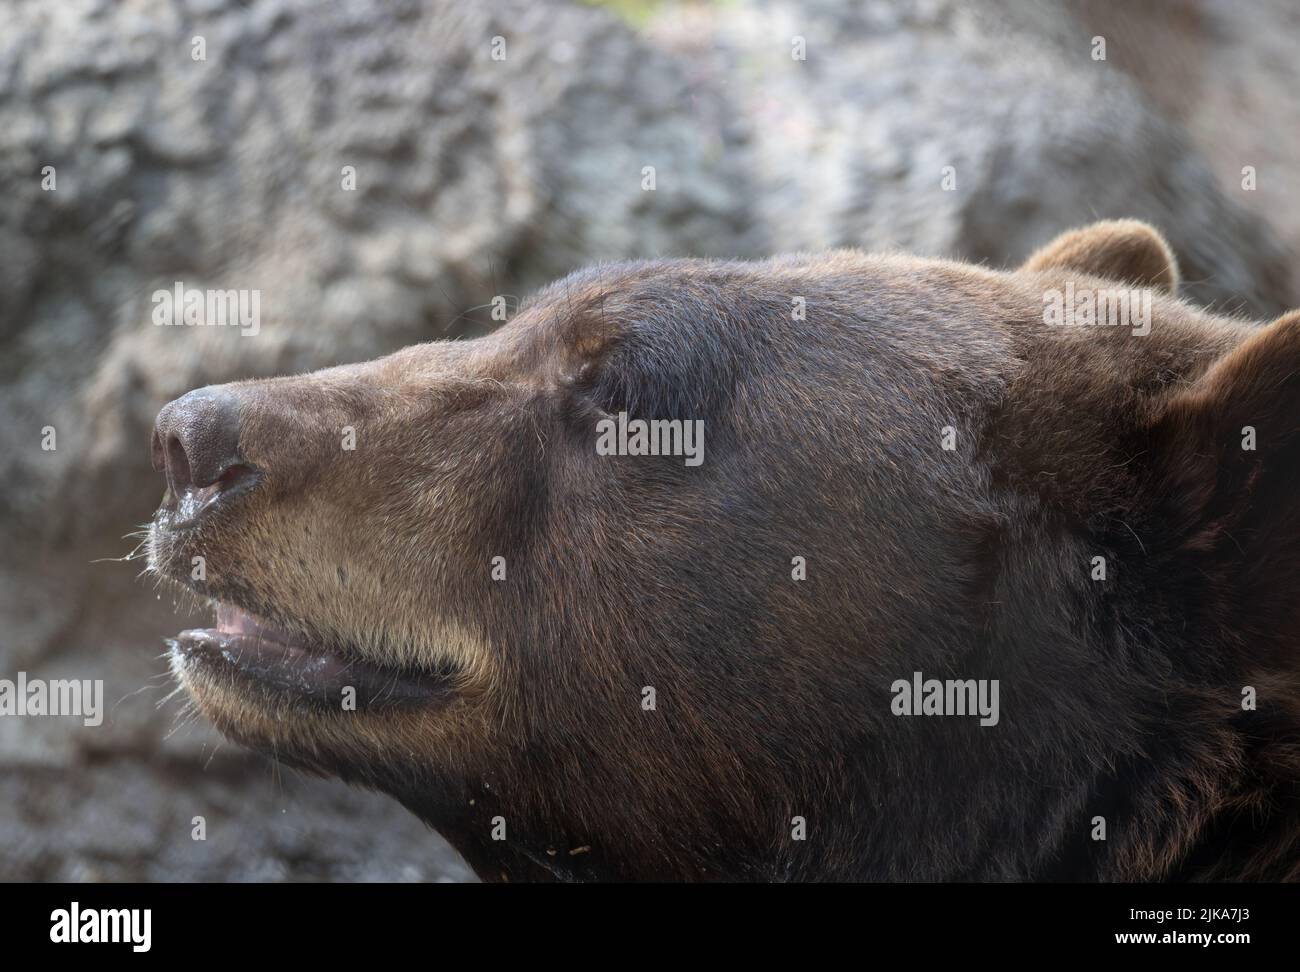 Extreme close up of the head of a captive American black bear, Ursus americanus. Photographed in the Houston Zoo in Texas. Stock Photo